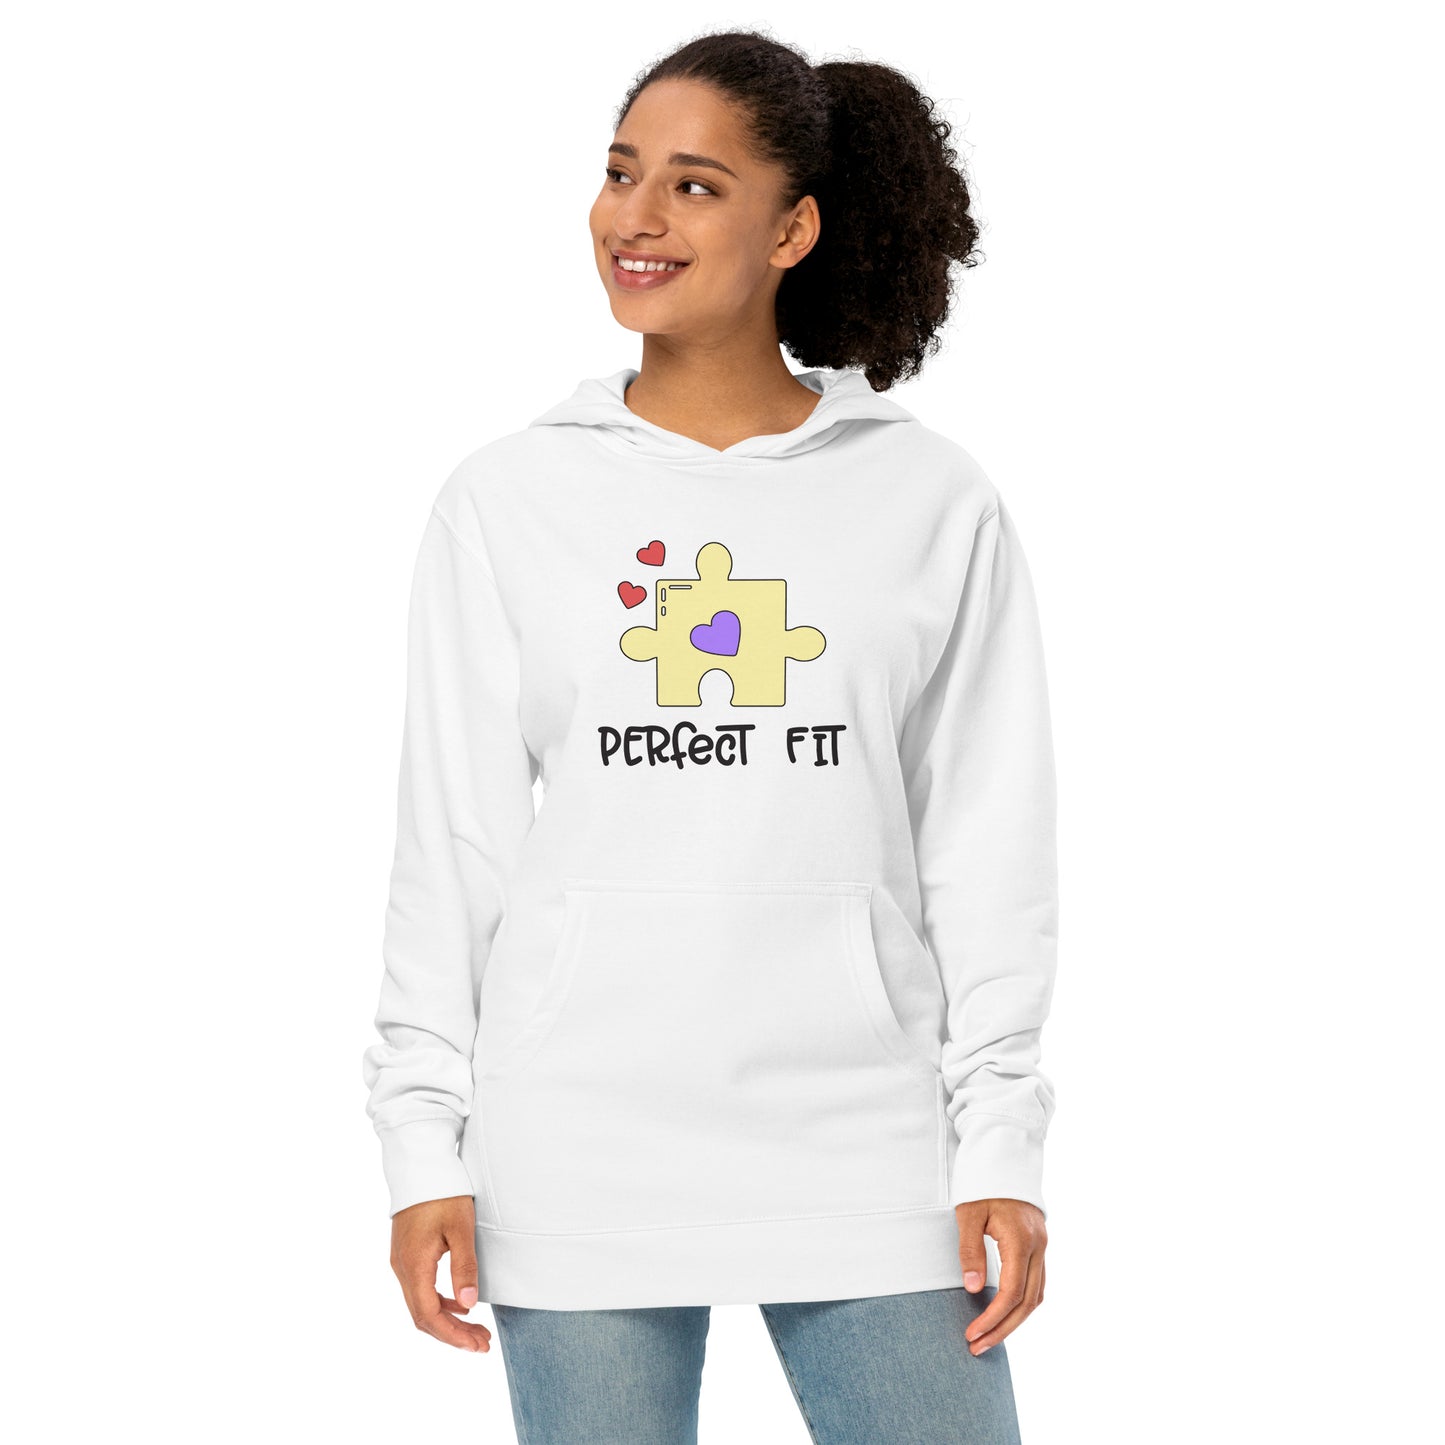 Adult 'Perfect Fit Yellow Piece' Midweight Hoodie